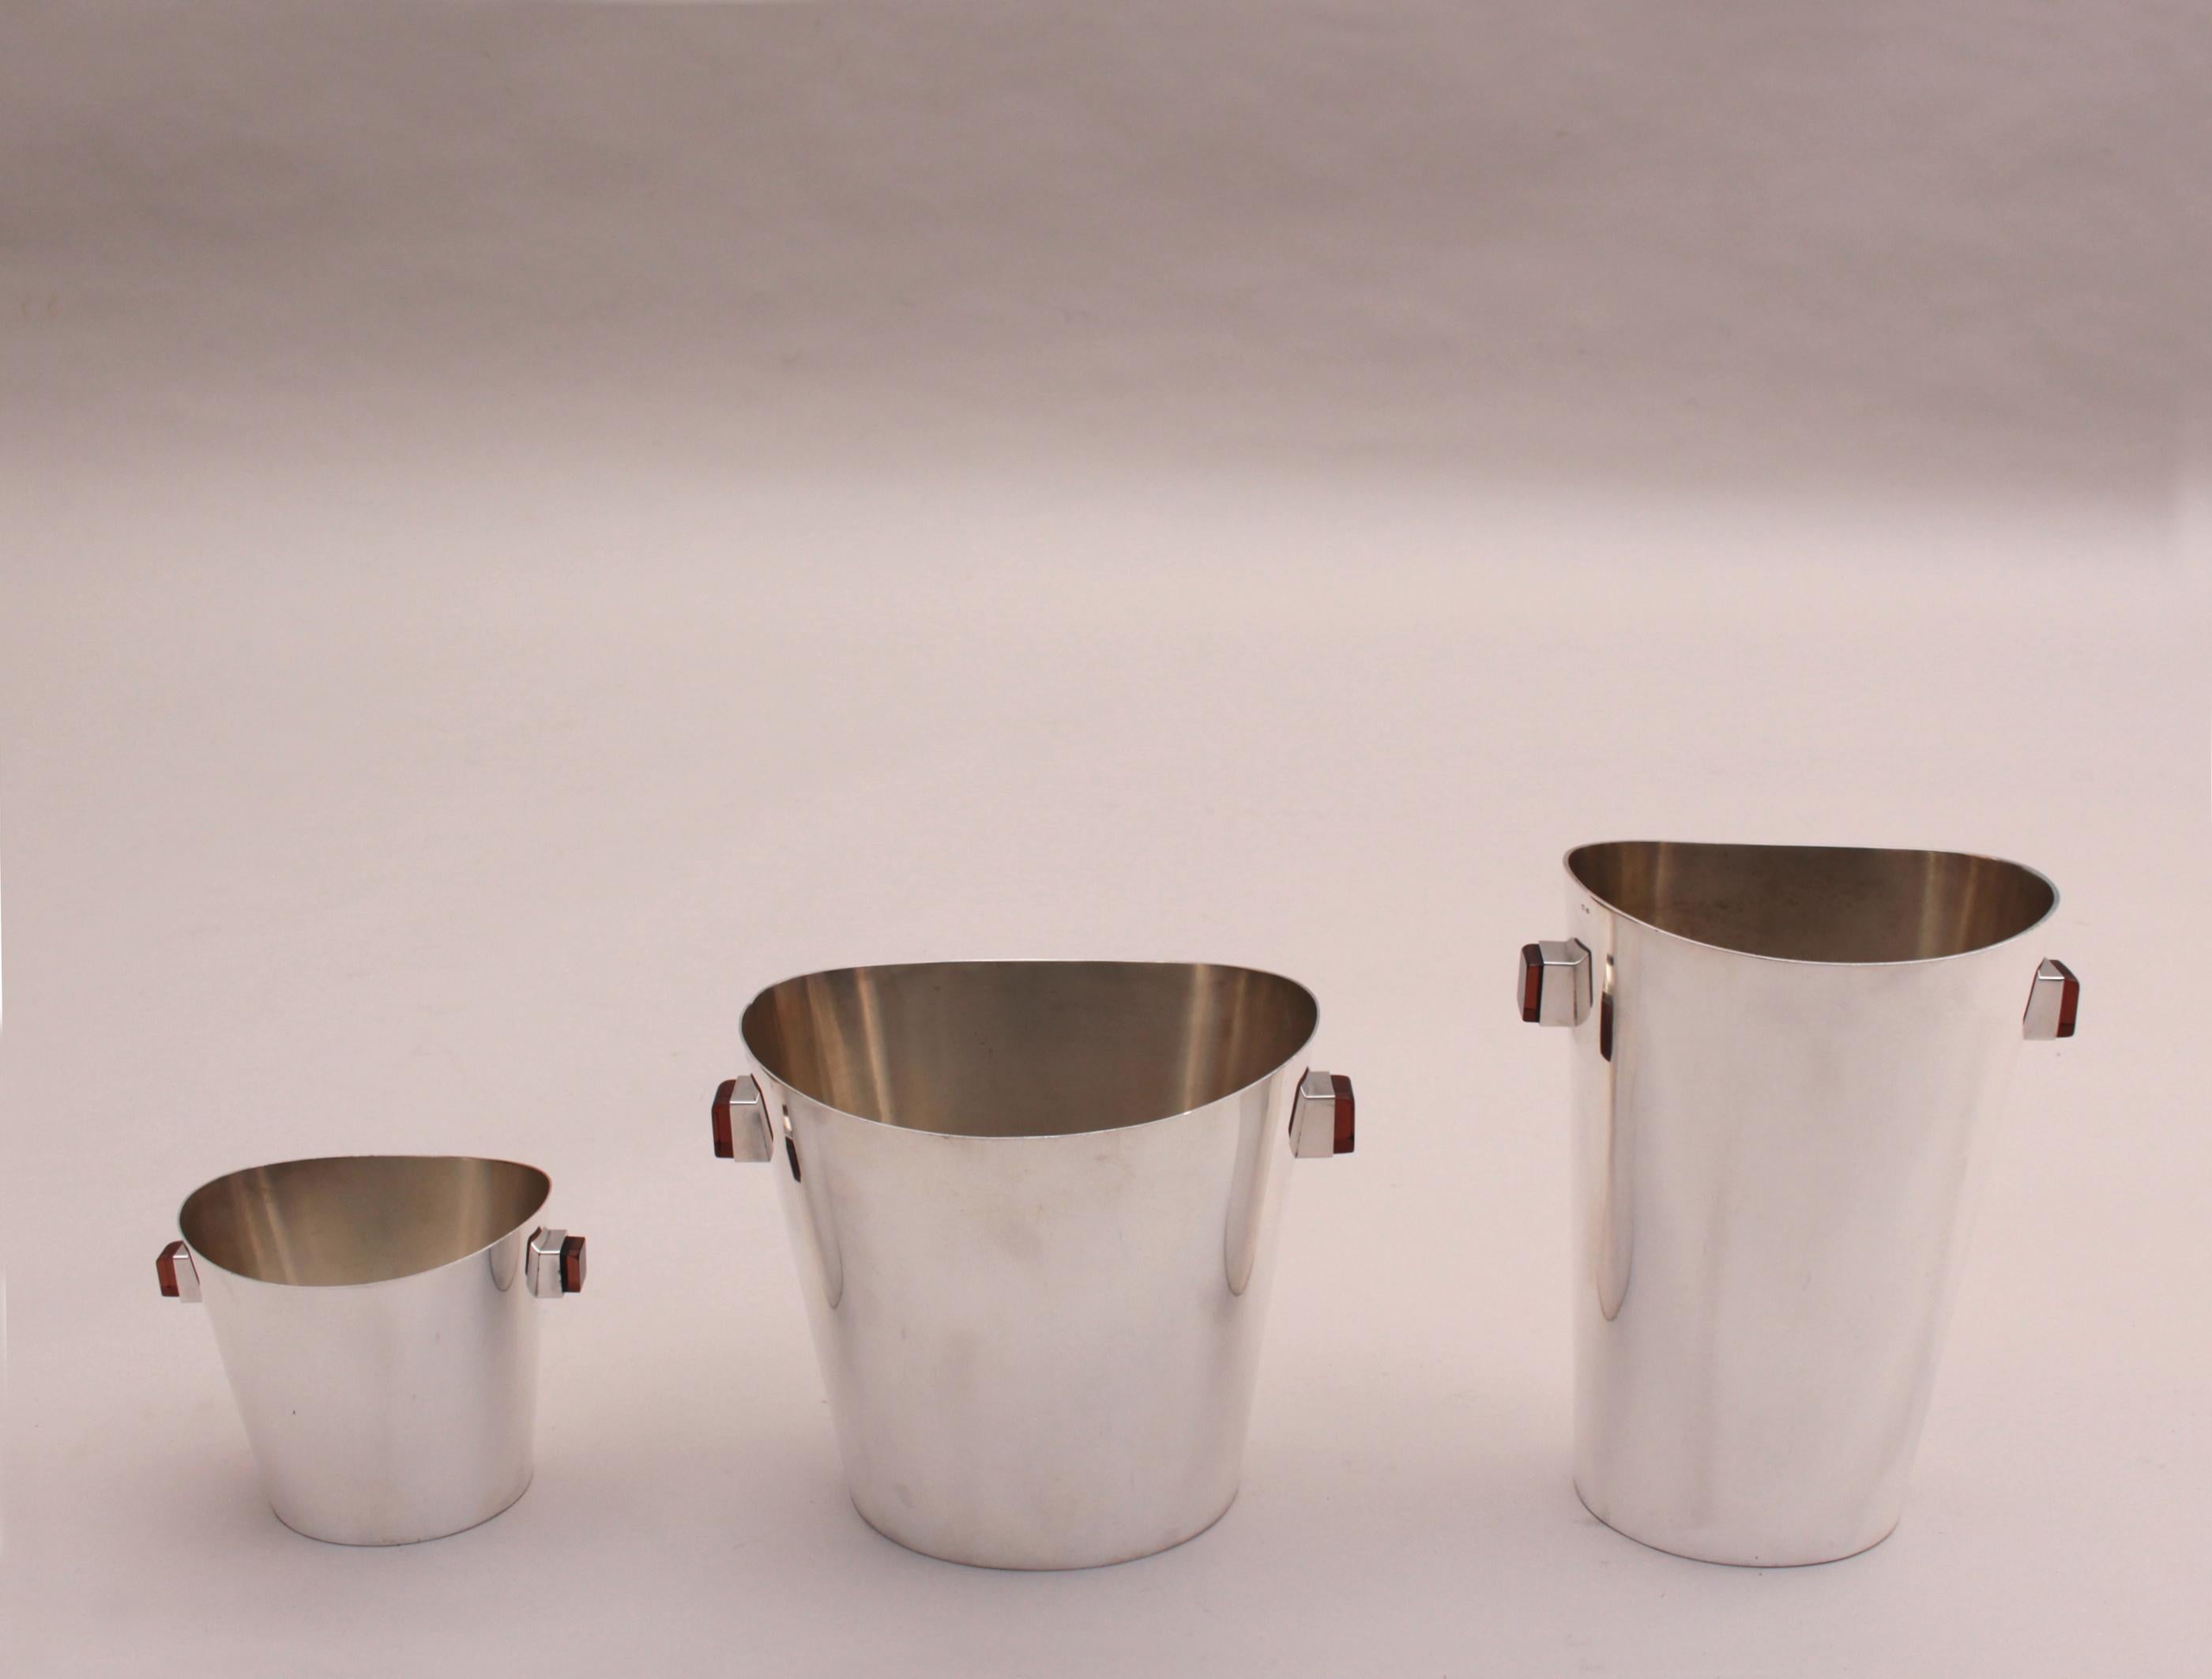 A set of 3 Fine French mid-century silver plated buckets with bakelite/resin handles.
Champagne and wine coolers, and ice bucket.
Hallmarked

Dimensions:
Small
H: 12,5 cm  - 5 »
L: 16,5cm – 6 ½ »
D: 11,5 – 4 ½ »

Medium
H: 20cm – 7 7/8 »
L: 24cm – 9